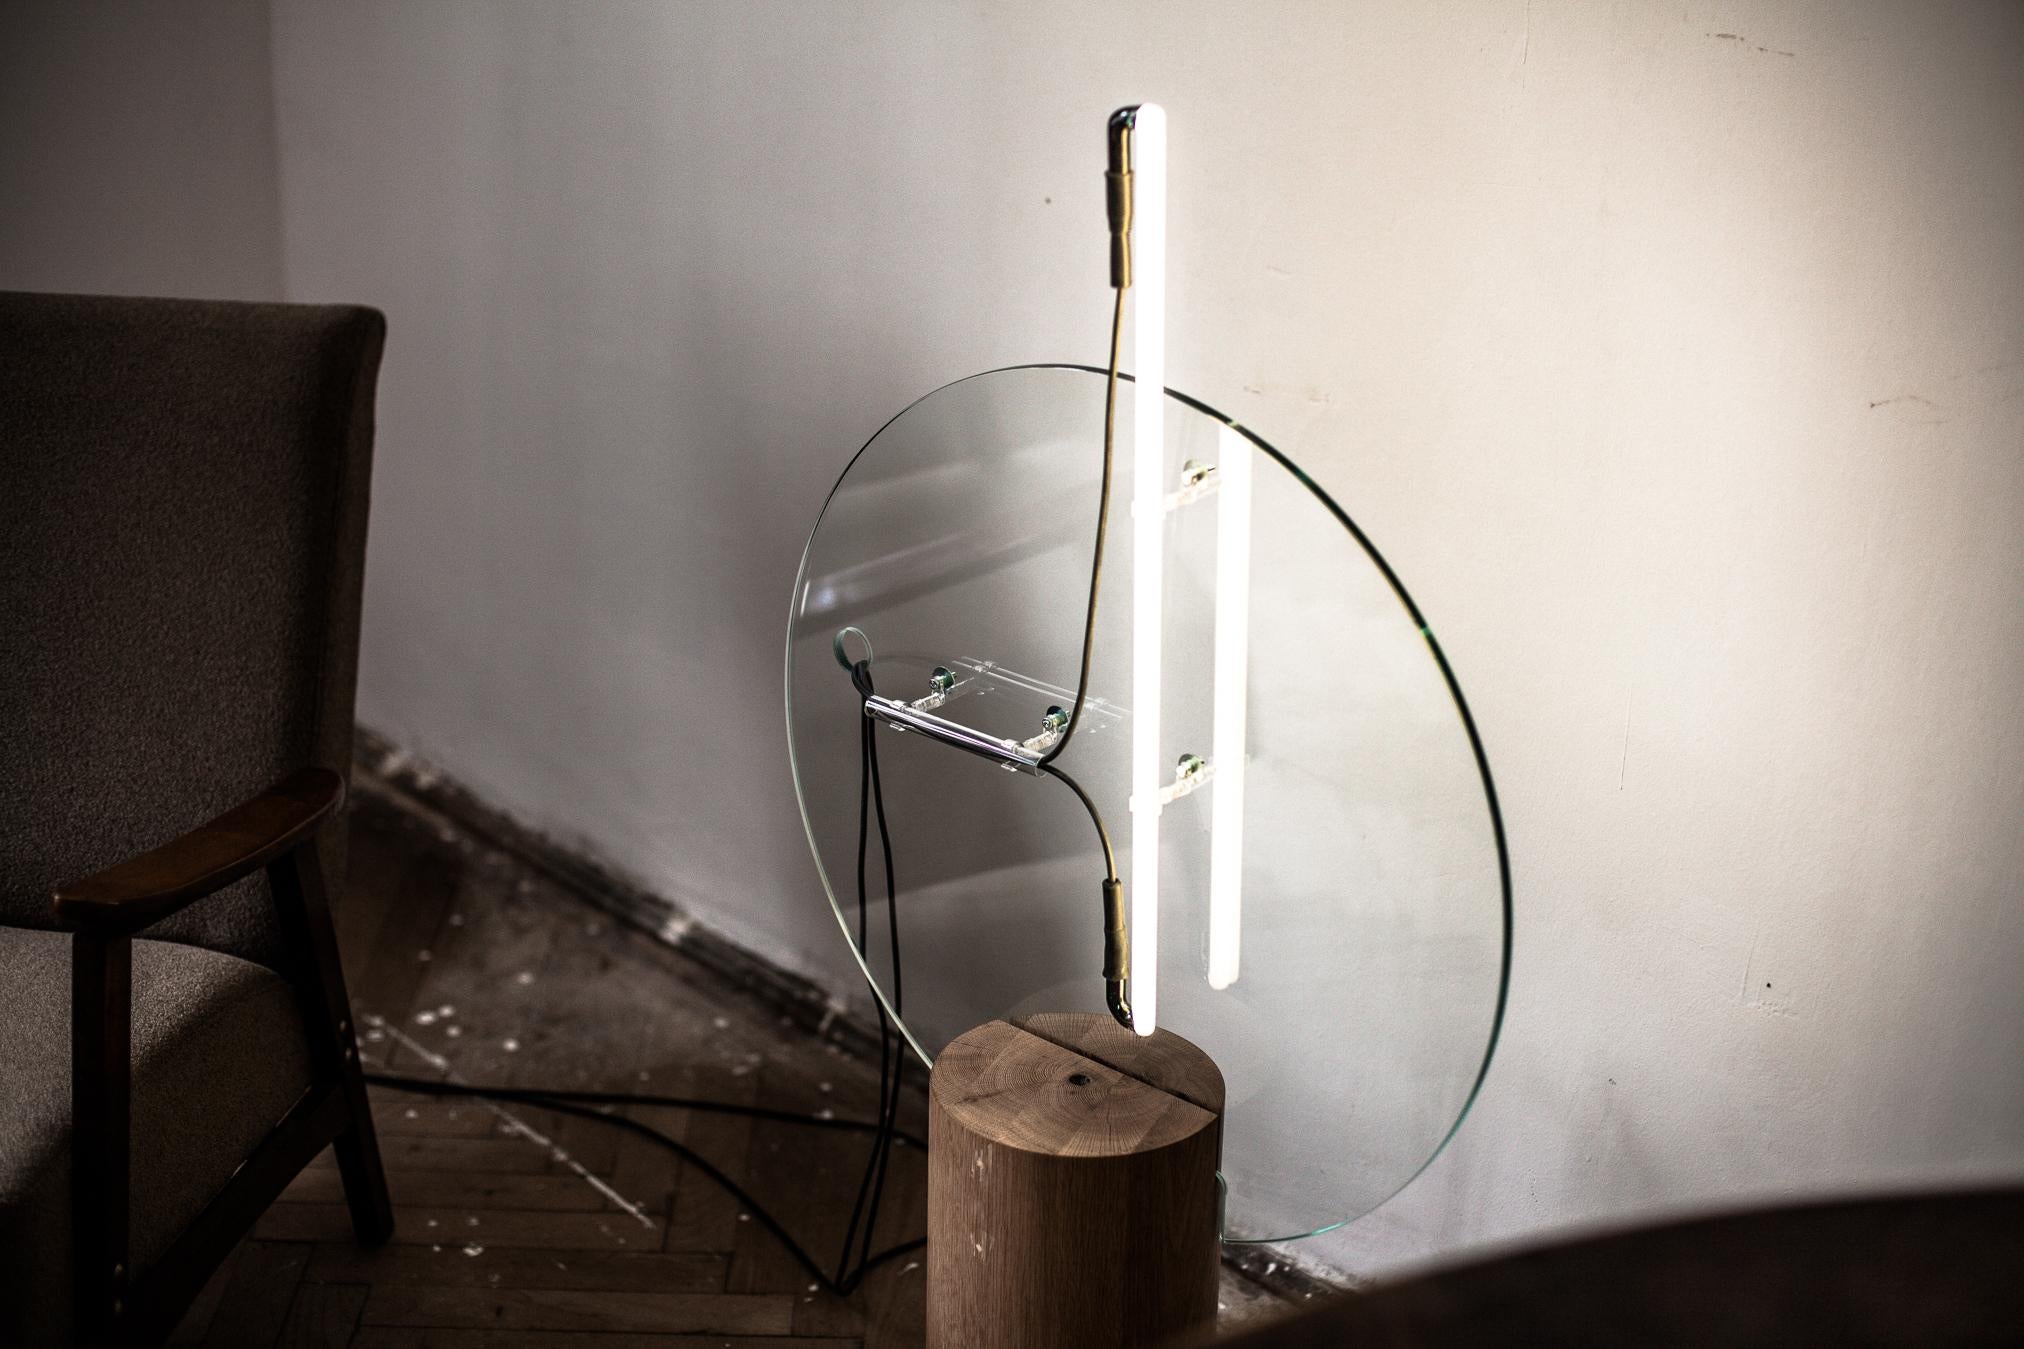 “Eight minutes old” is a family of sculptured objects and light installations. They’re part of a small series of two compositions and are made in a composition of wood and glass, using the light tube as a central element. The base of the lamp is a